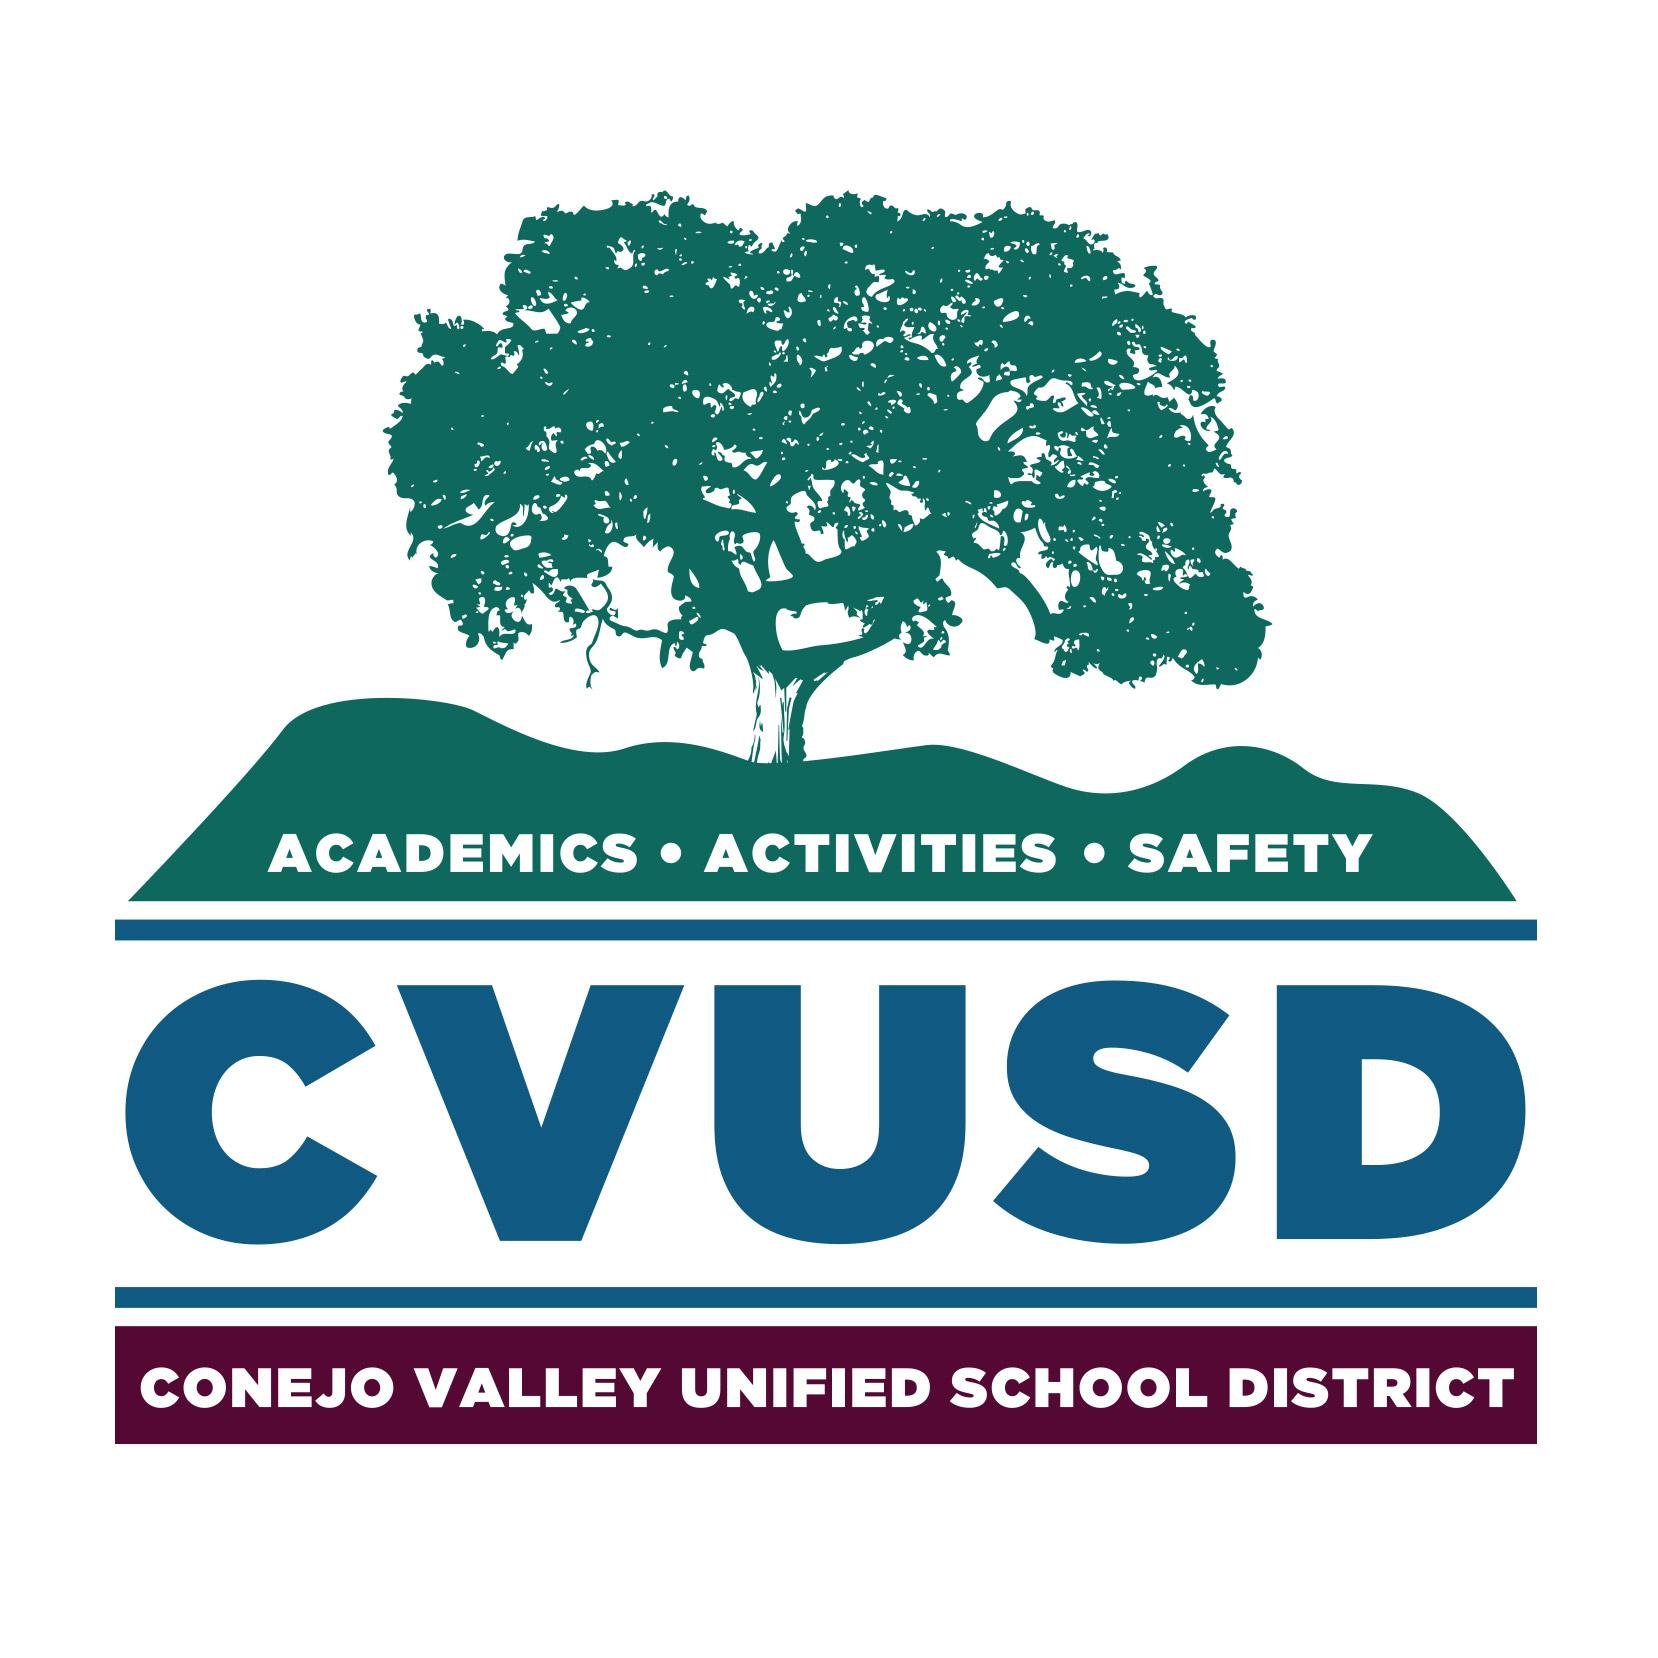 At Conejo Valley Unified School District we believe ALL students deserve an exceptional educational experience. Discover #CVUSDForward & https://t.co/KXp3rJxRqK